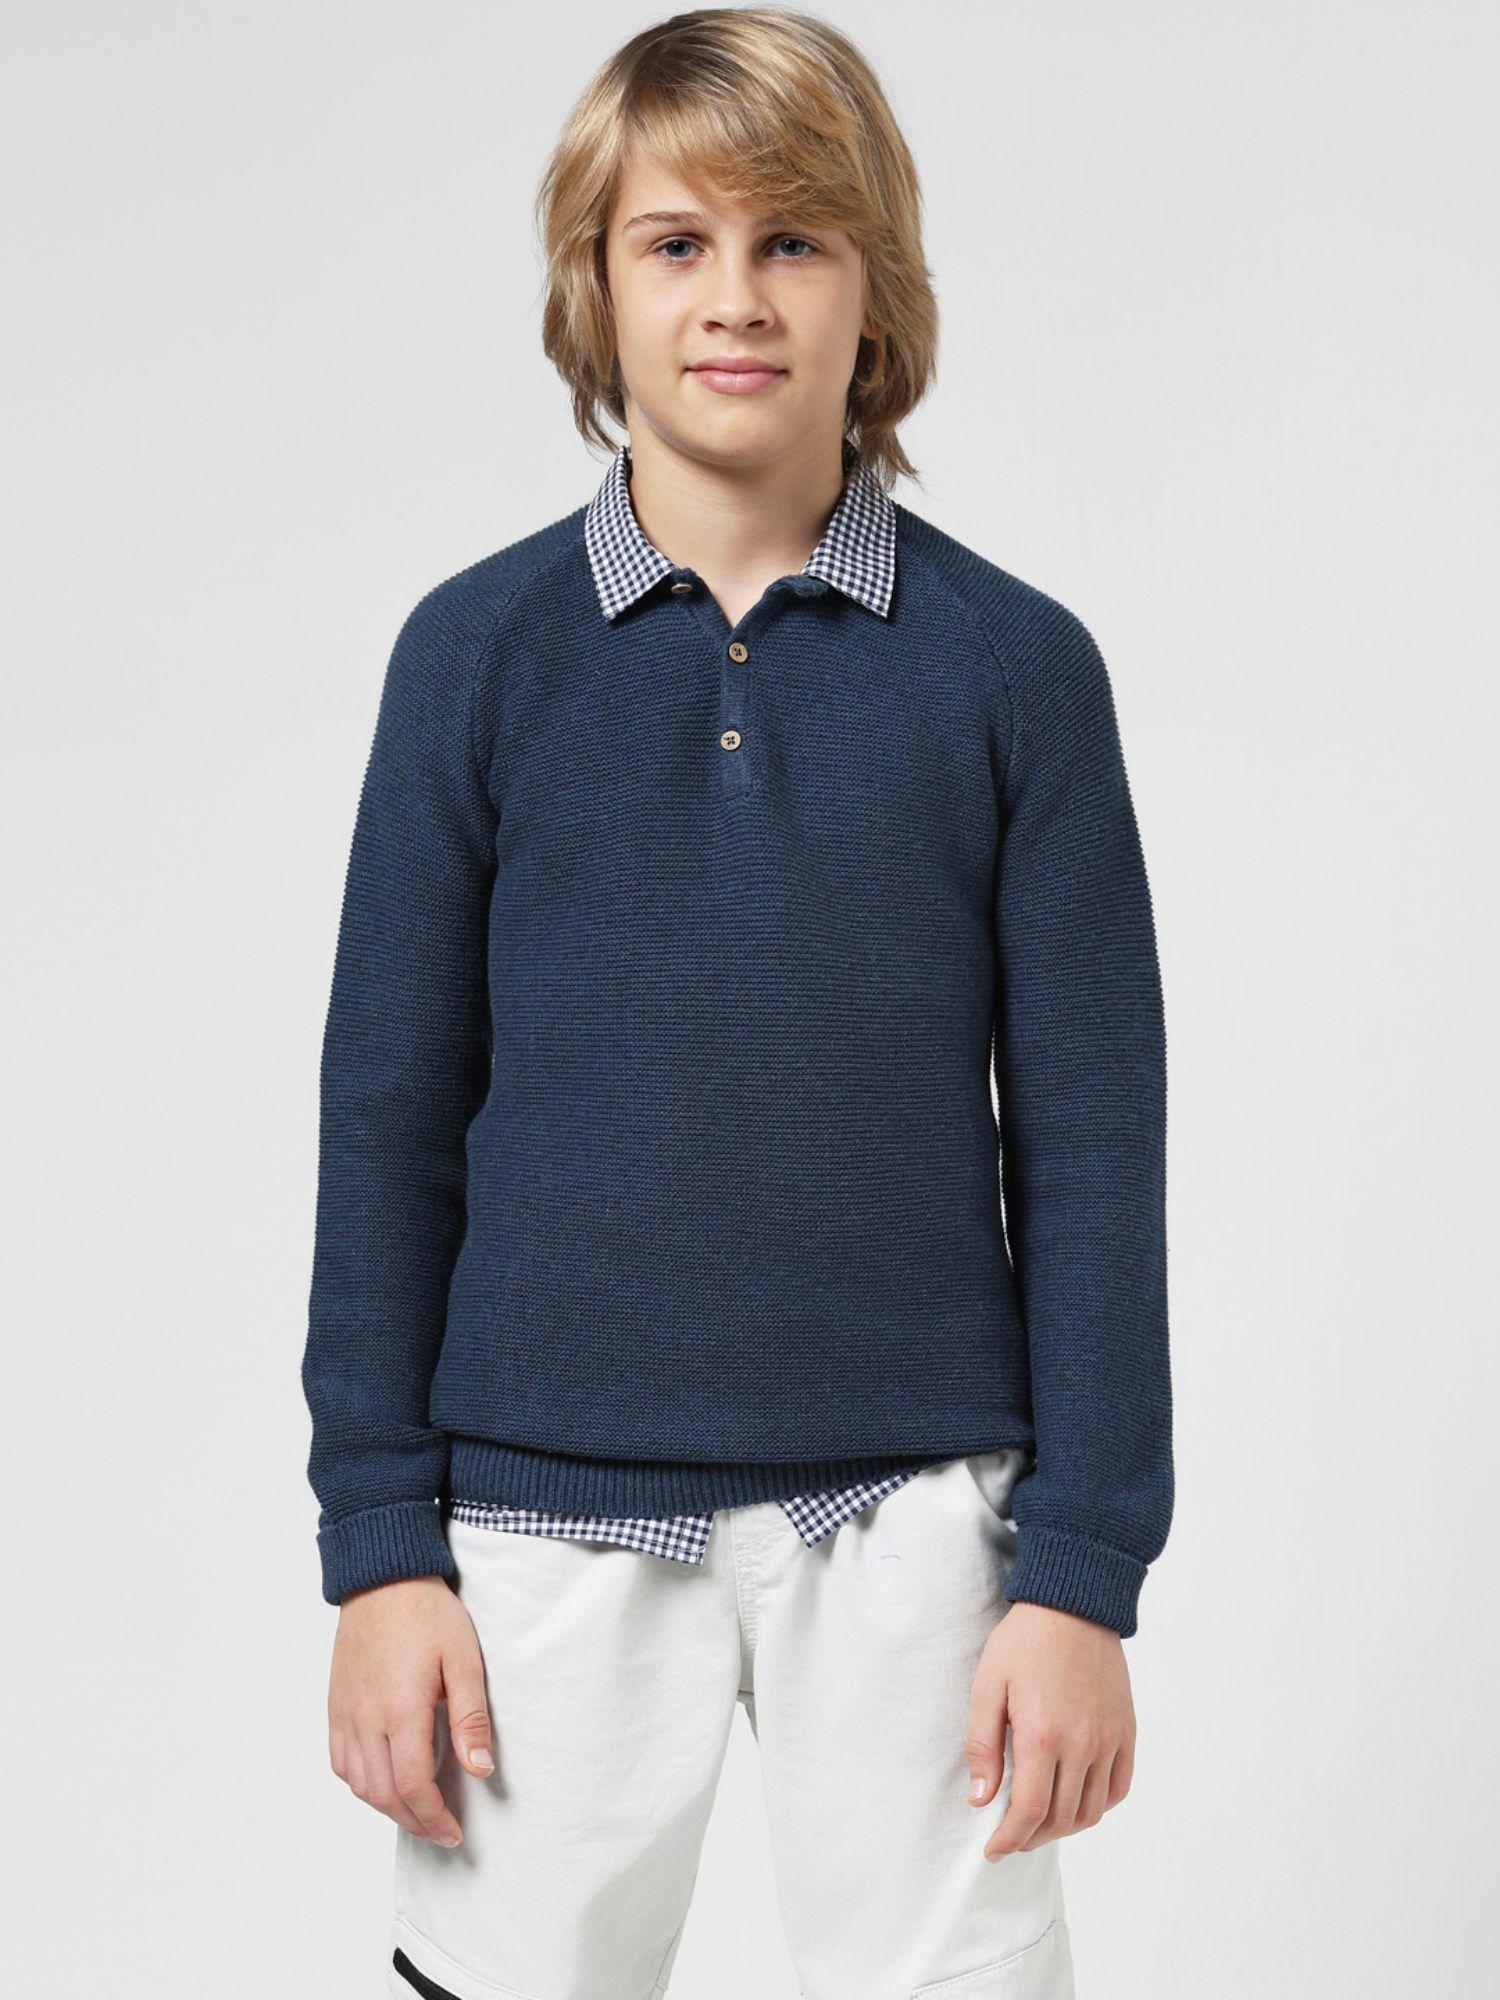 boys solid navy blue sweater